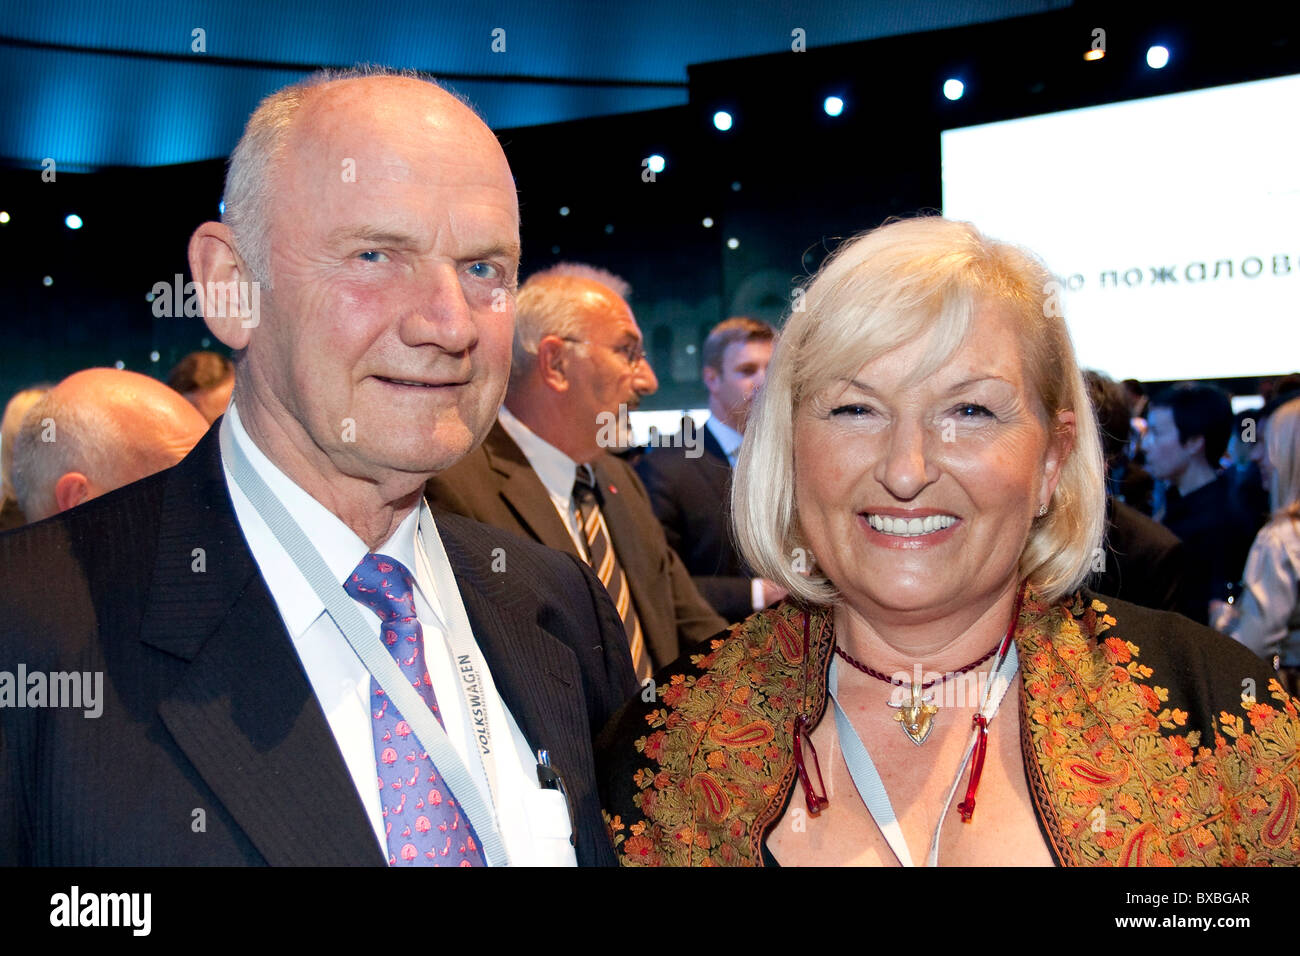 Ferdinand Karl Piech, chairman of the supervisory board of Volkswagen AG, with his wife Ursula Piech, during the Group Night of Stock Photo